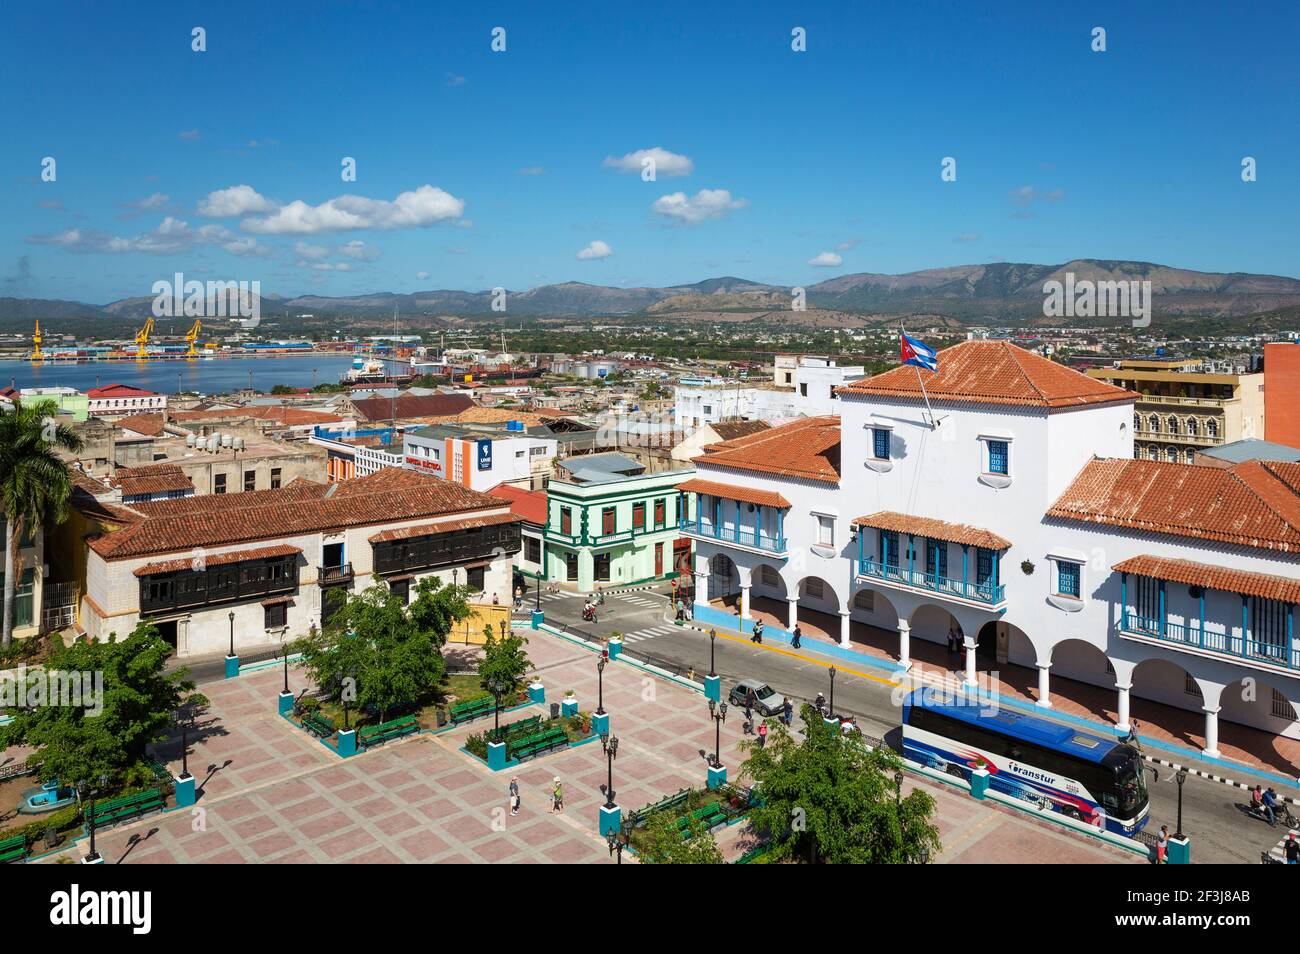 View of Santiago de Cuba, in the foreground the Parque CÃ©spedes with the town hall on the right and the Casa VelÃ¡zquez on the left, Santiage de Cuba, Cuba Stock Photo